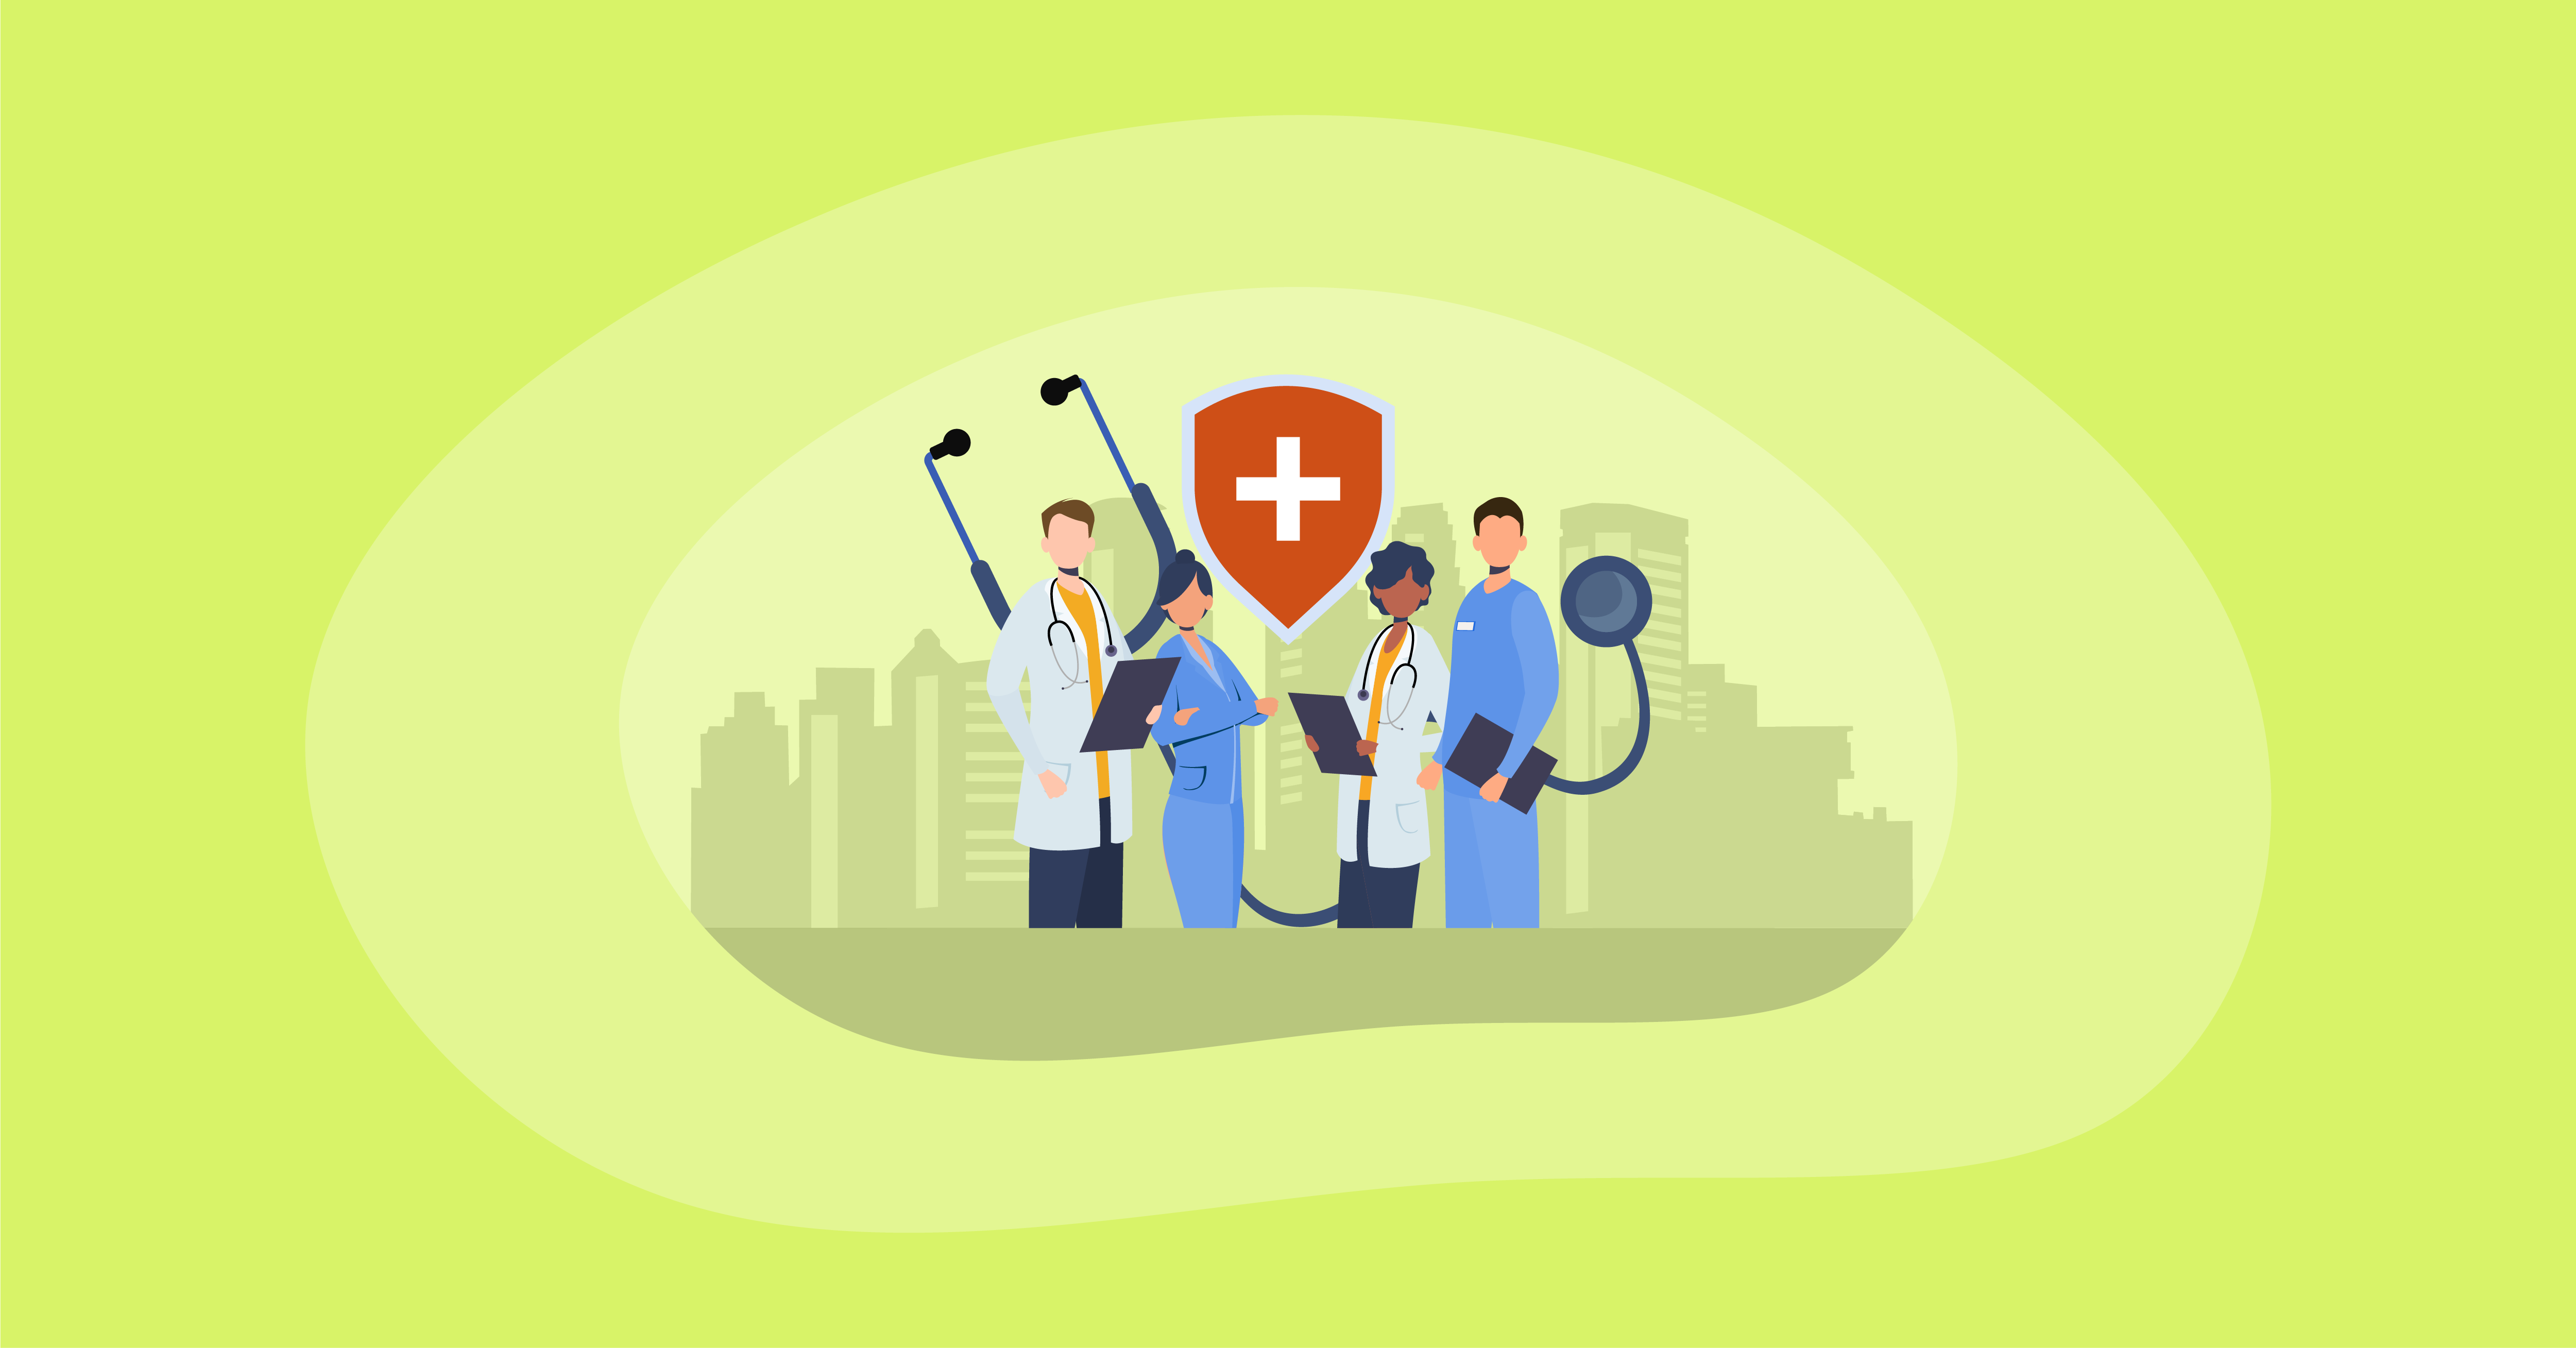 Illustration of a group of healthcare workers